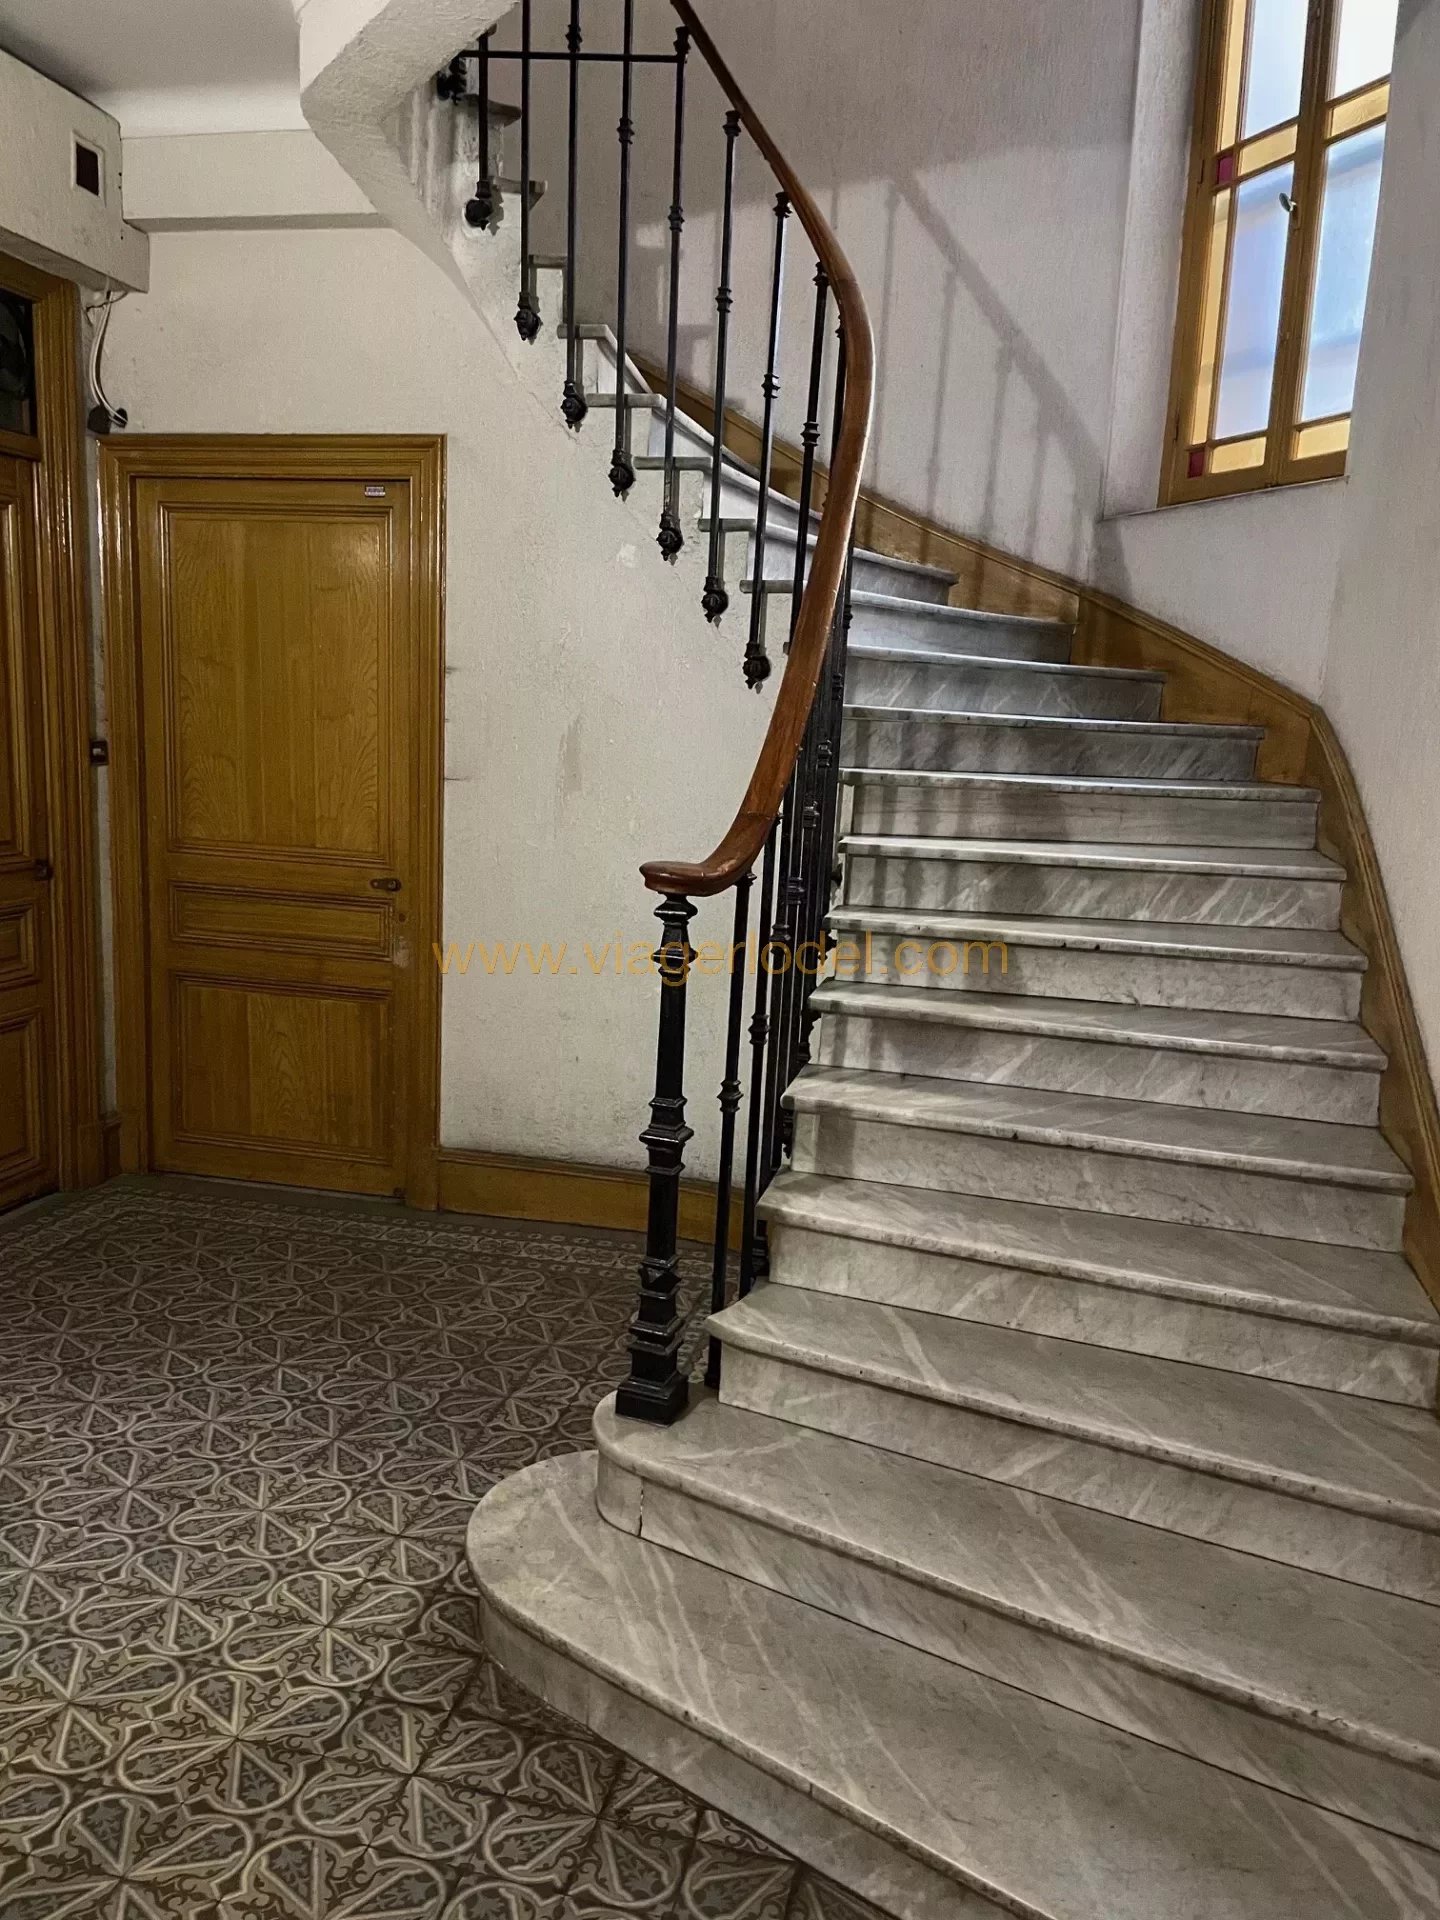 Réf. annonce : 9303 - VIAGER OCCUPE - NICE (06)